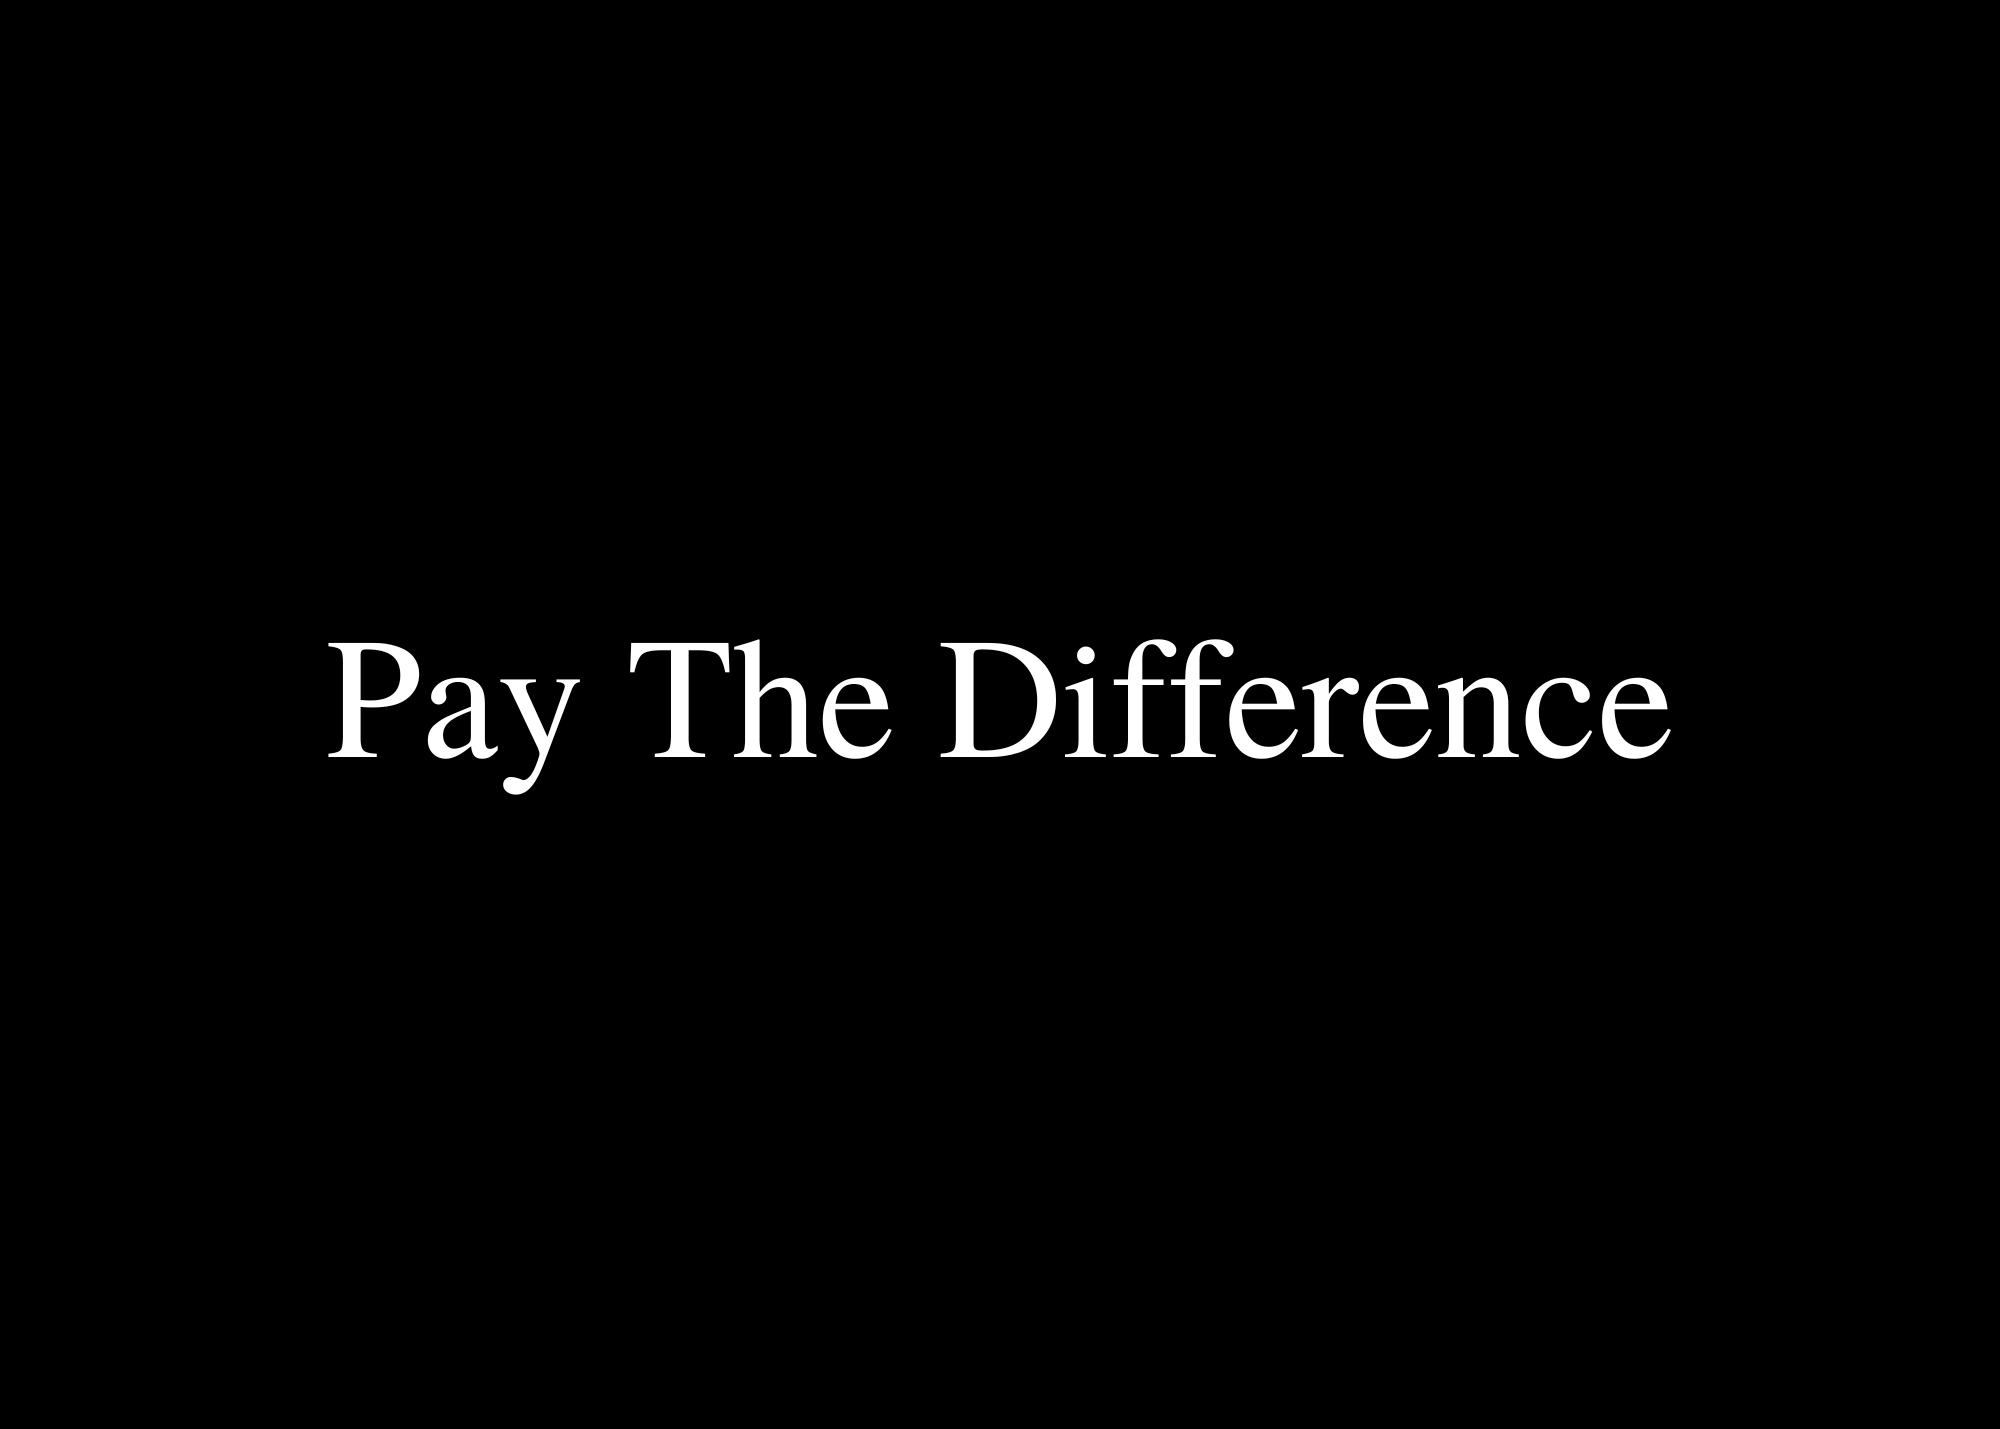 Pay The Difference for joshuaandrewbelida@gmail.com